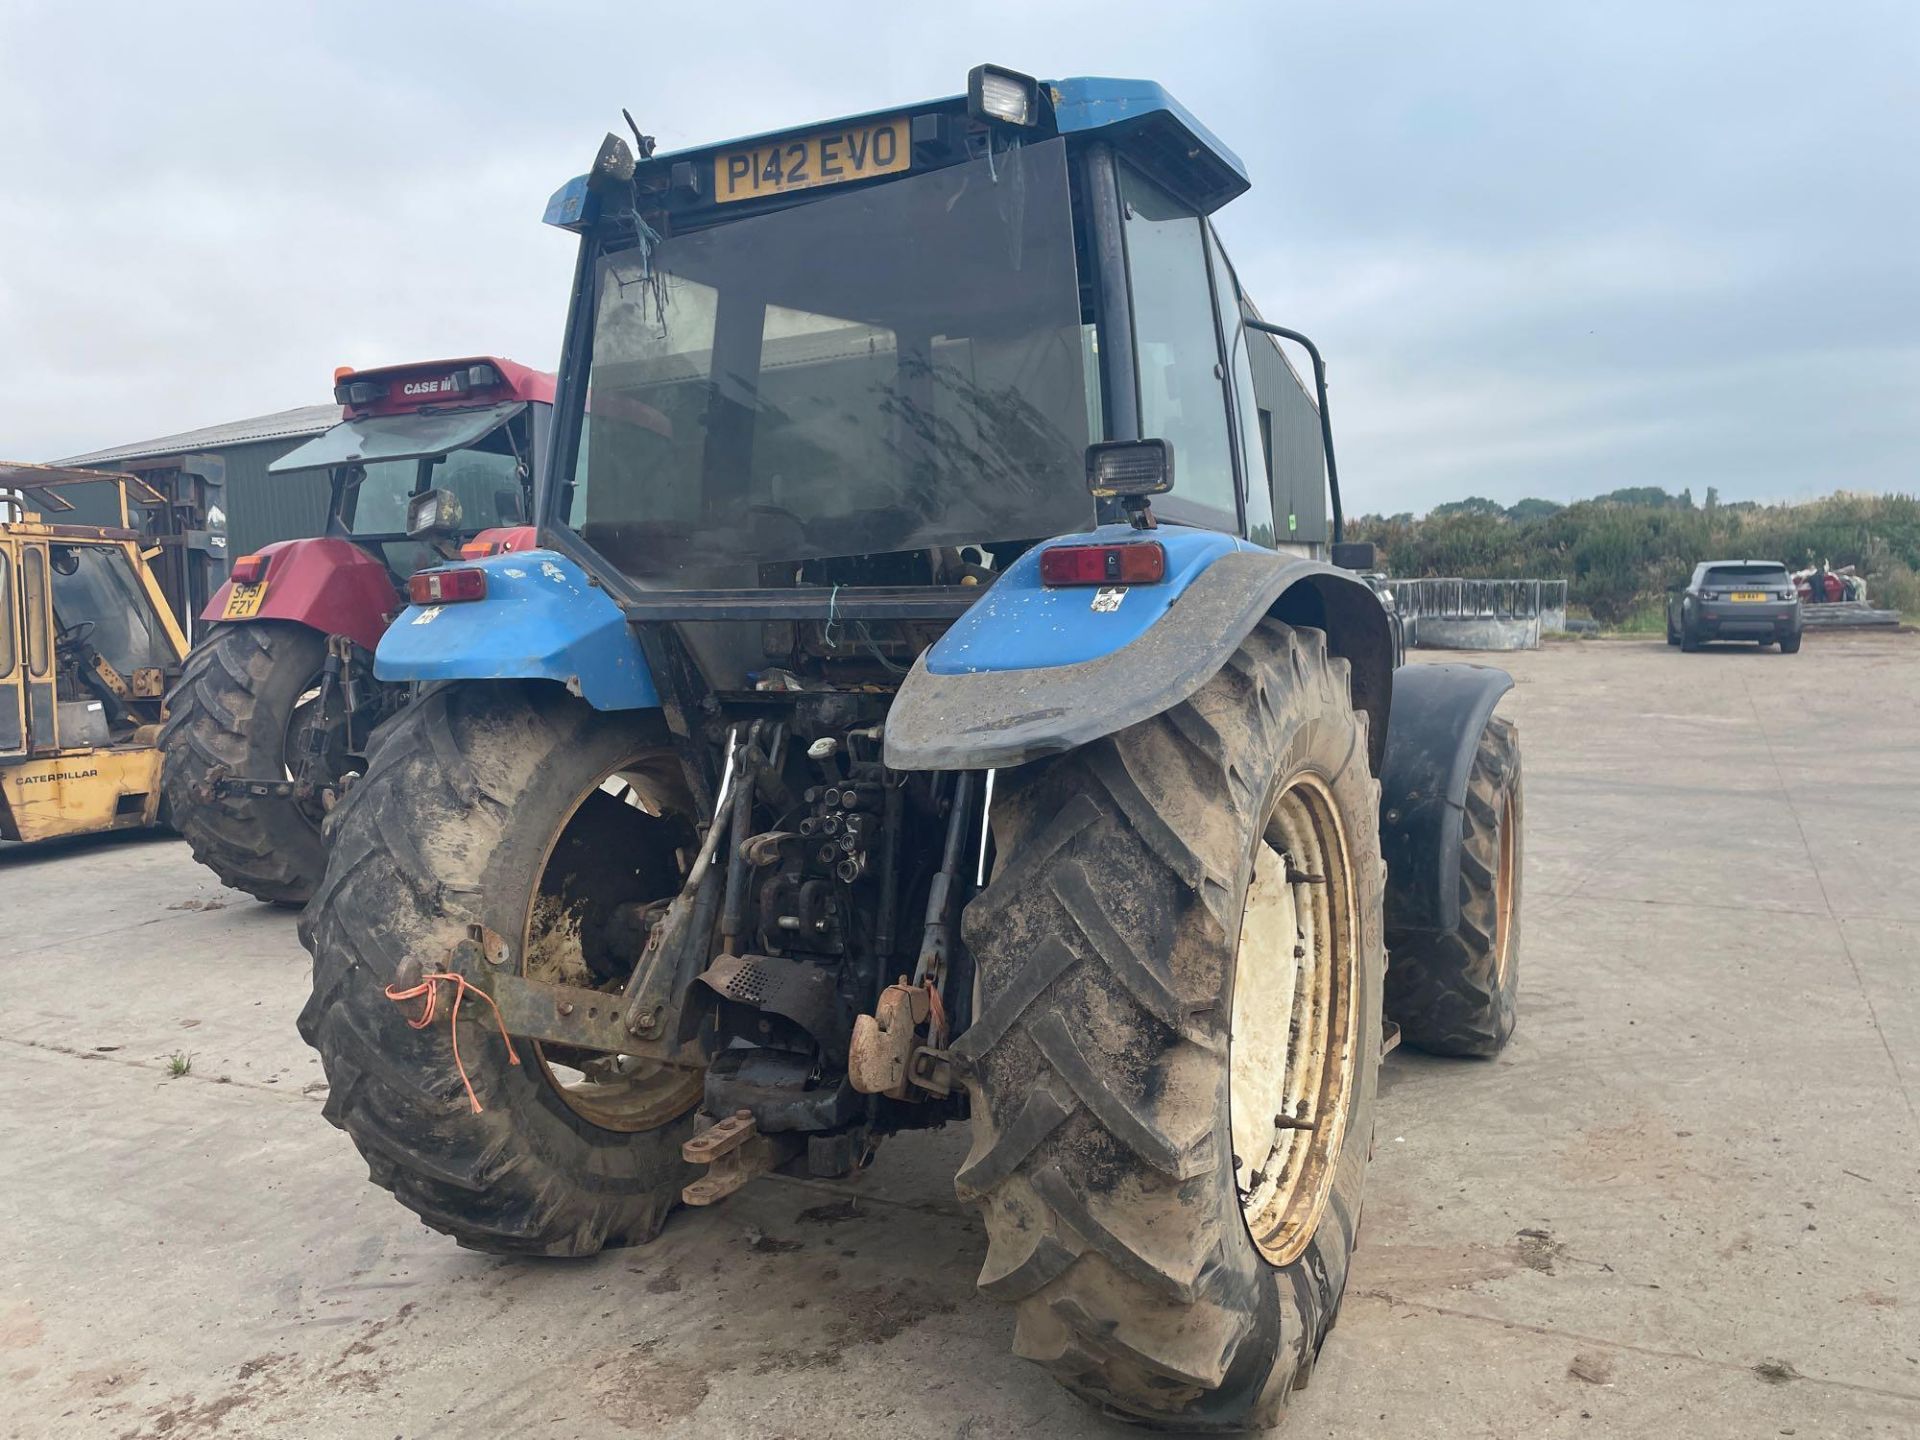 1997 New Holland 8340 4wd tractor with 2 manual spools on 14.9R28 front and 18.4R38 rear wheels and - Image 16 of 22